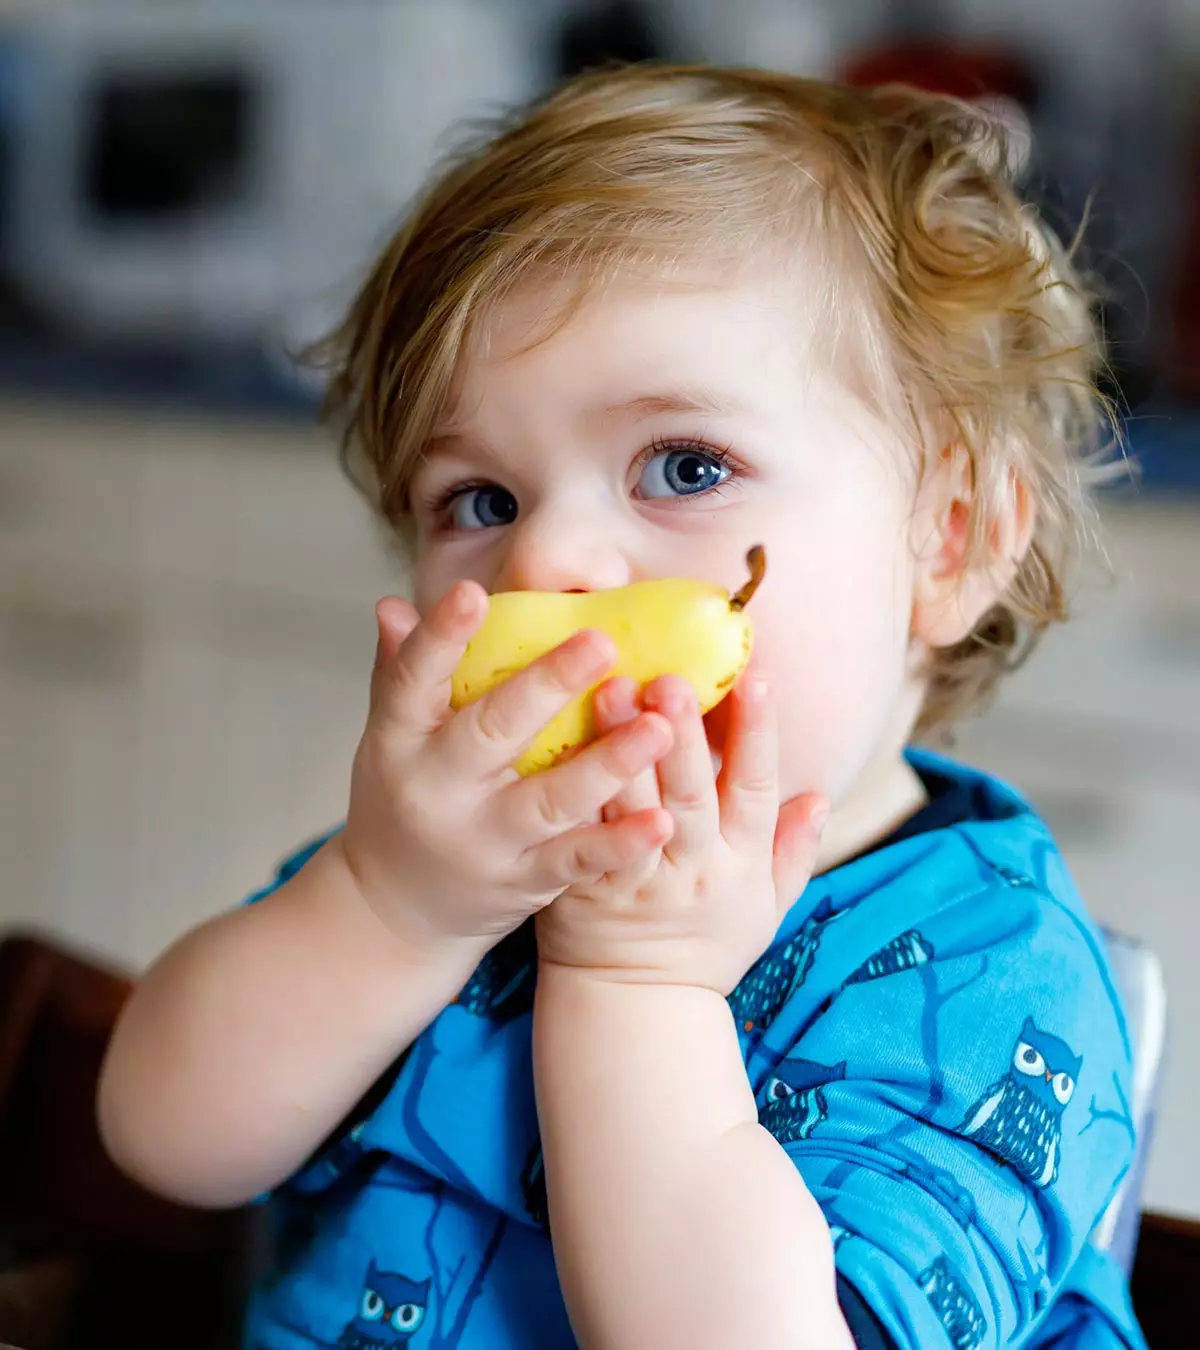 This nutritious fruit can boost immunity and regulate your little one’s bowel movements.